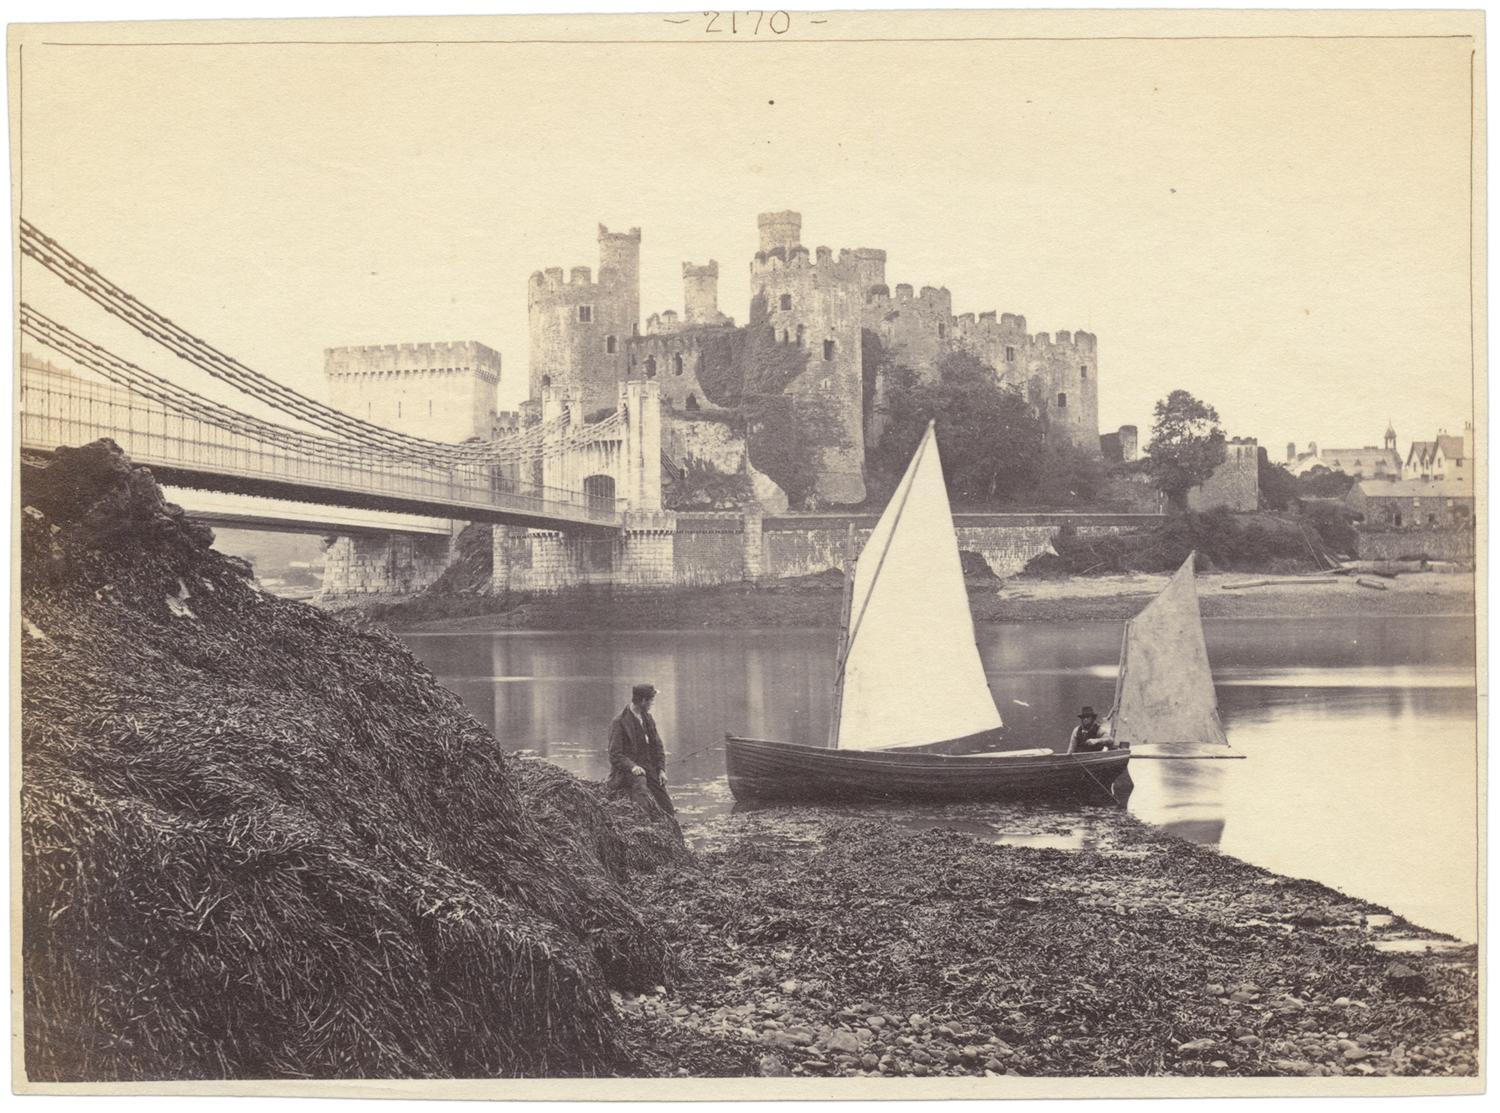 In the foreground, two sailboats near the shore, with a suspension bridge shown at the left leading to a castle.